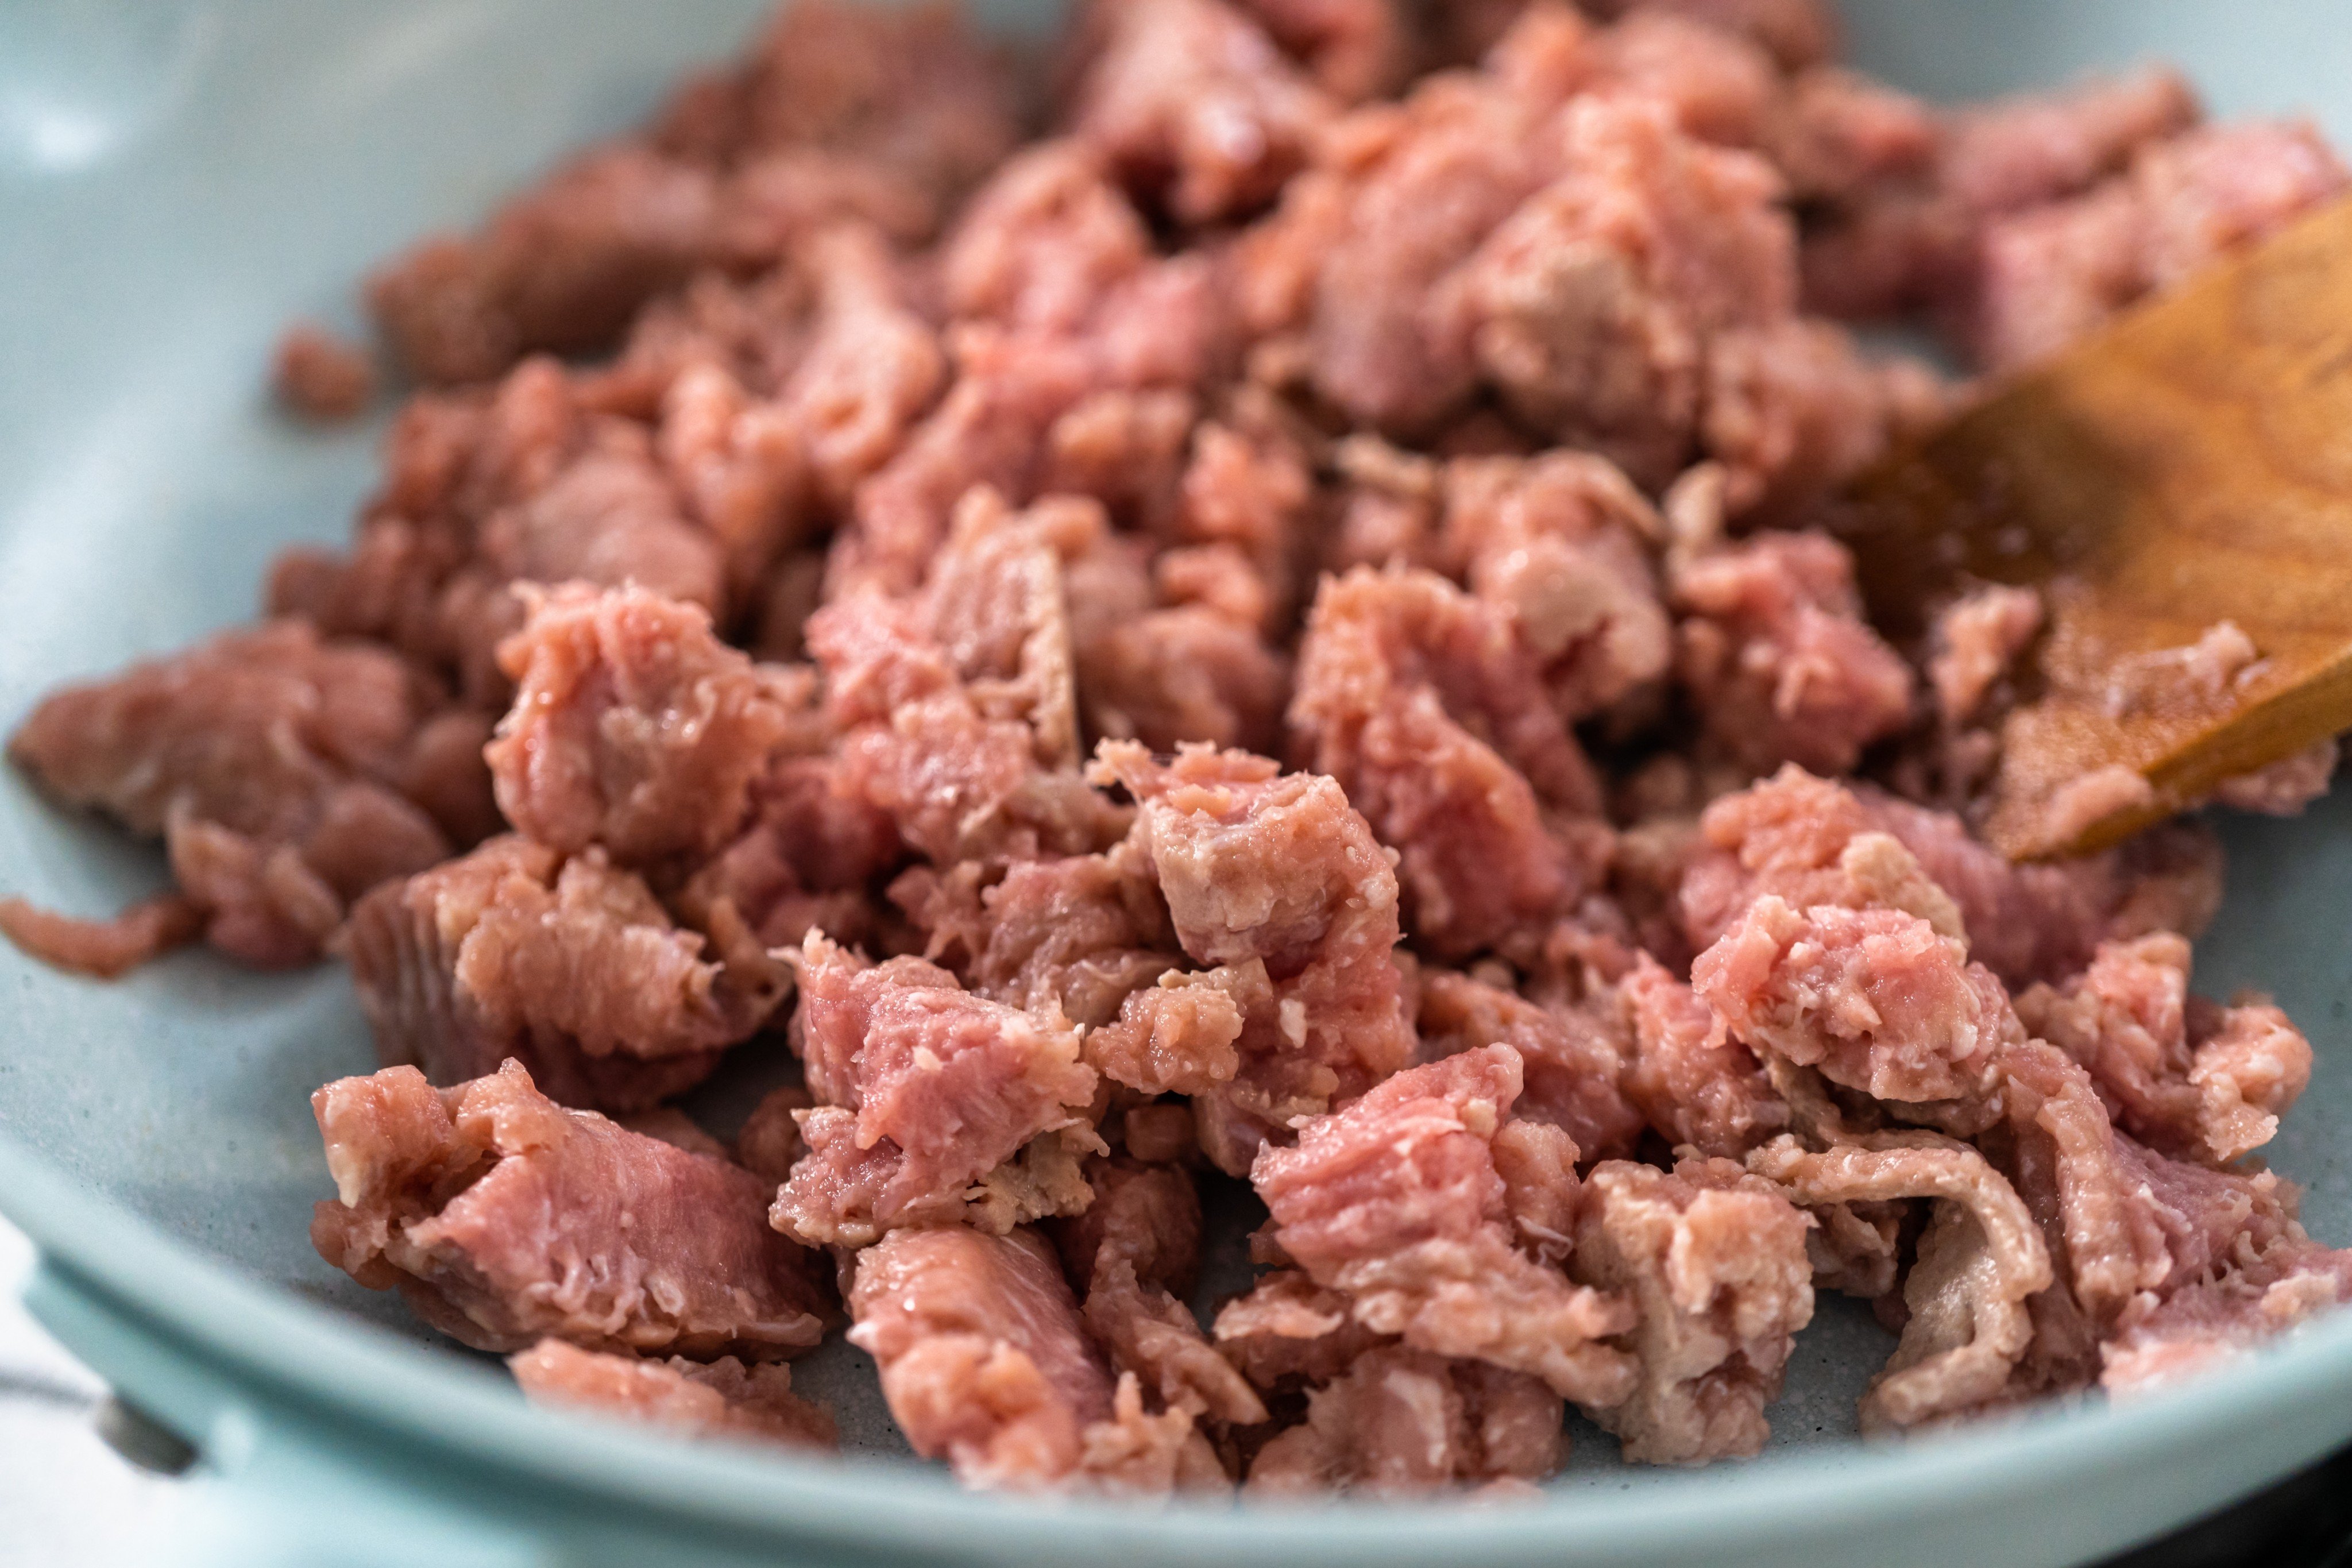 Buying frozen ground turkey, or freezing your own, is an option for home cooks - but how long can you and should you keep it in the freezer? We find out. If you will be defrosting a turkey to roast for Thanksgiving or Christmas, we’ve got you covered too. Photo: Shutterstock